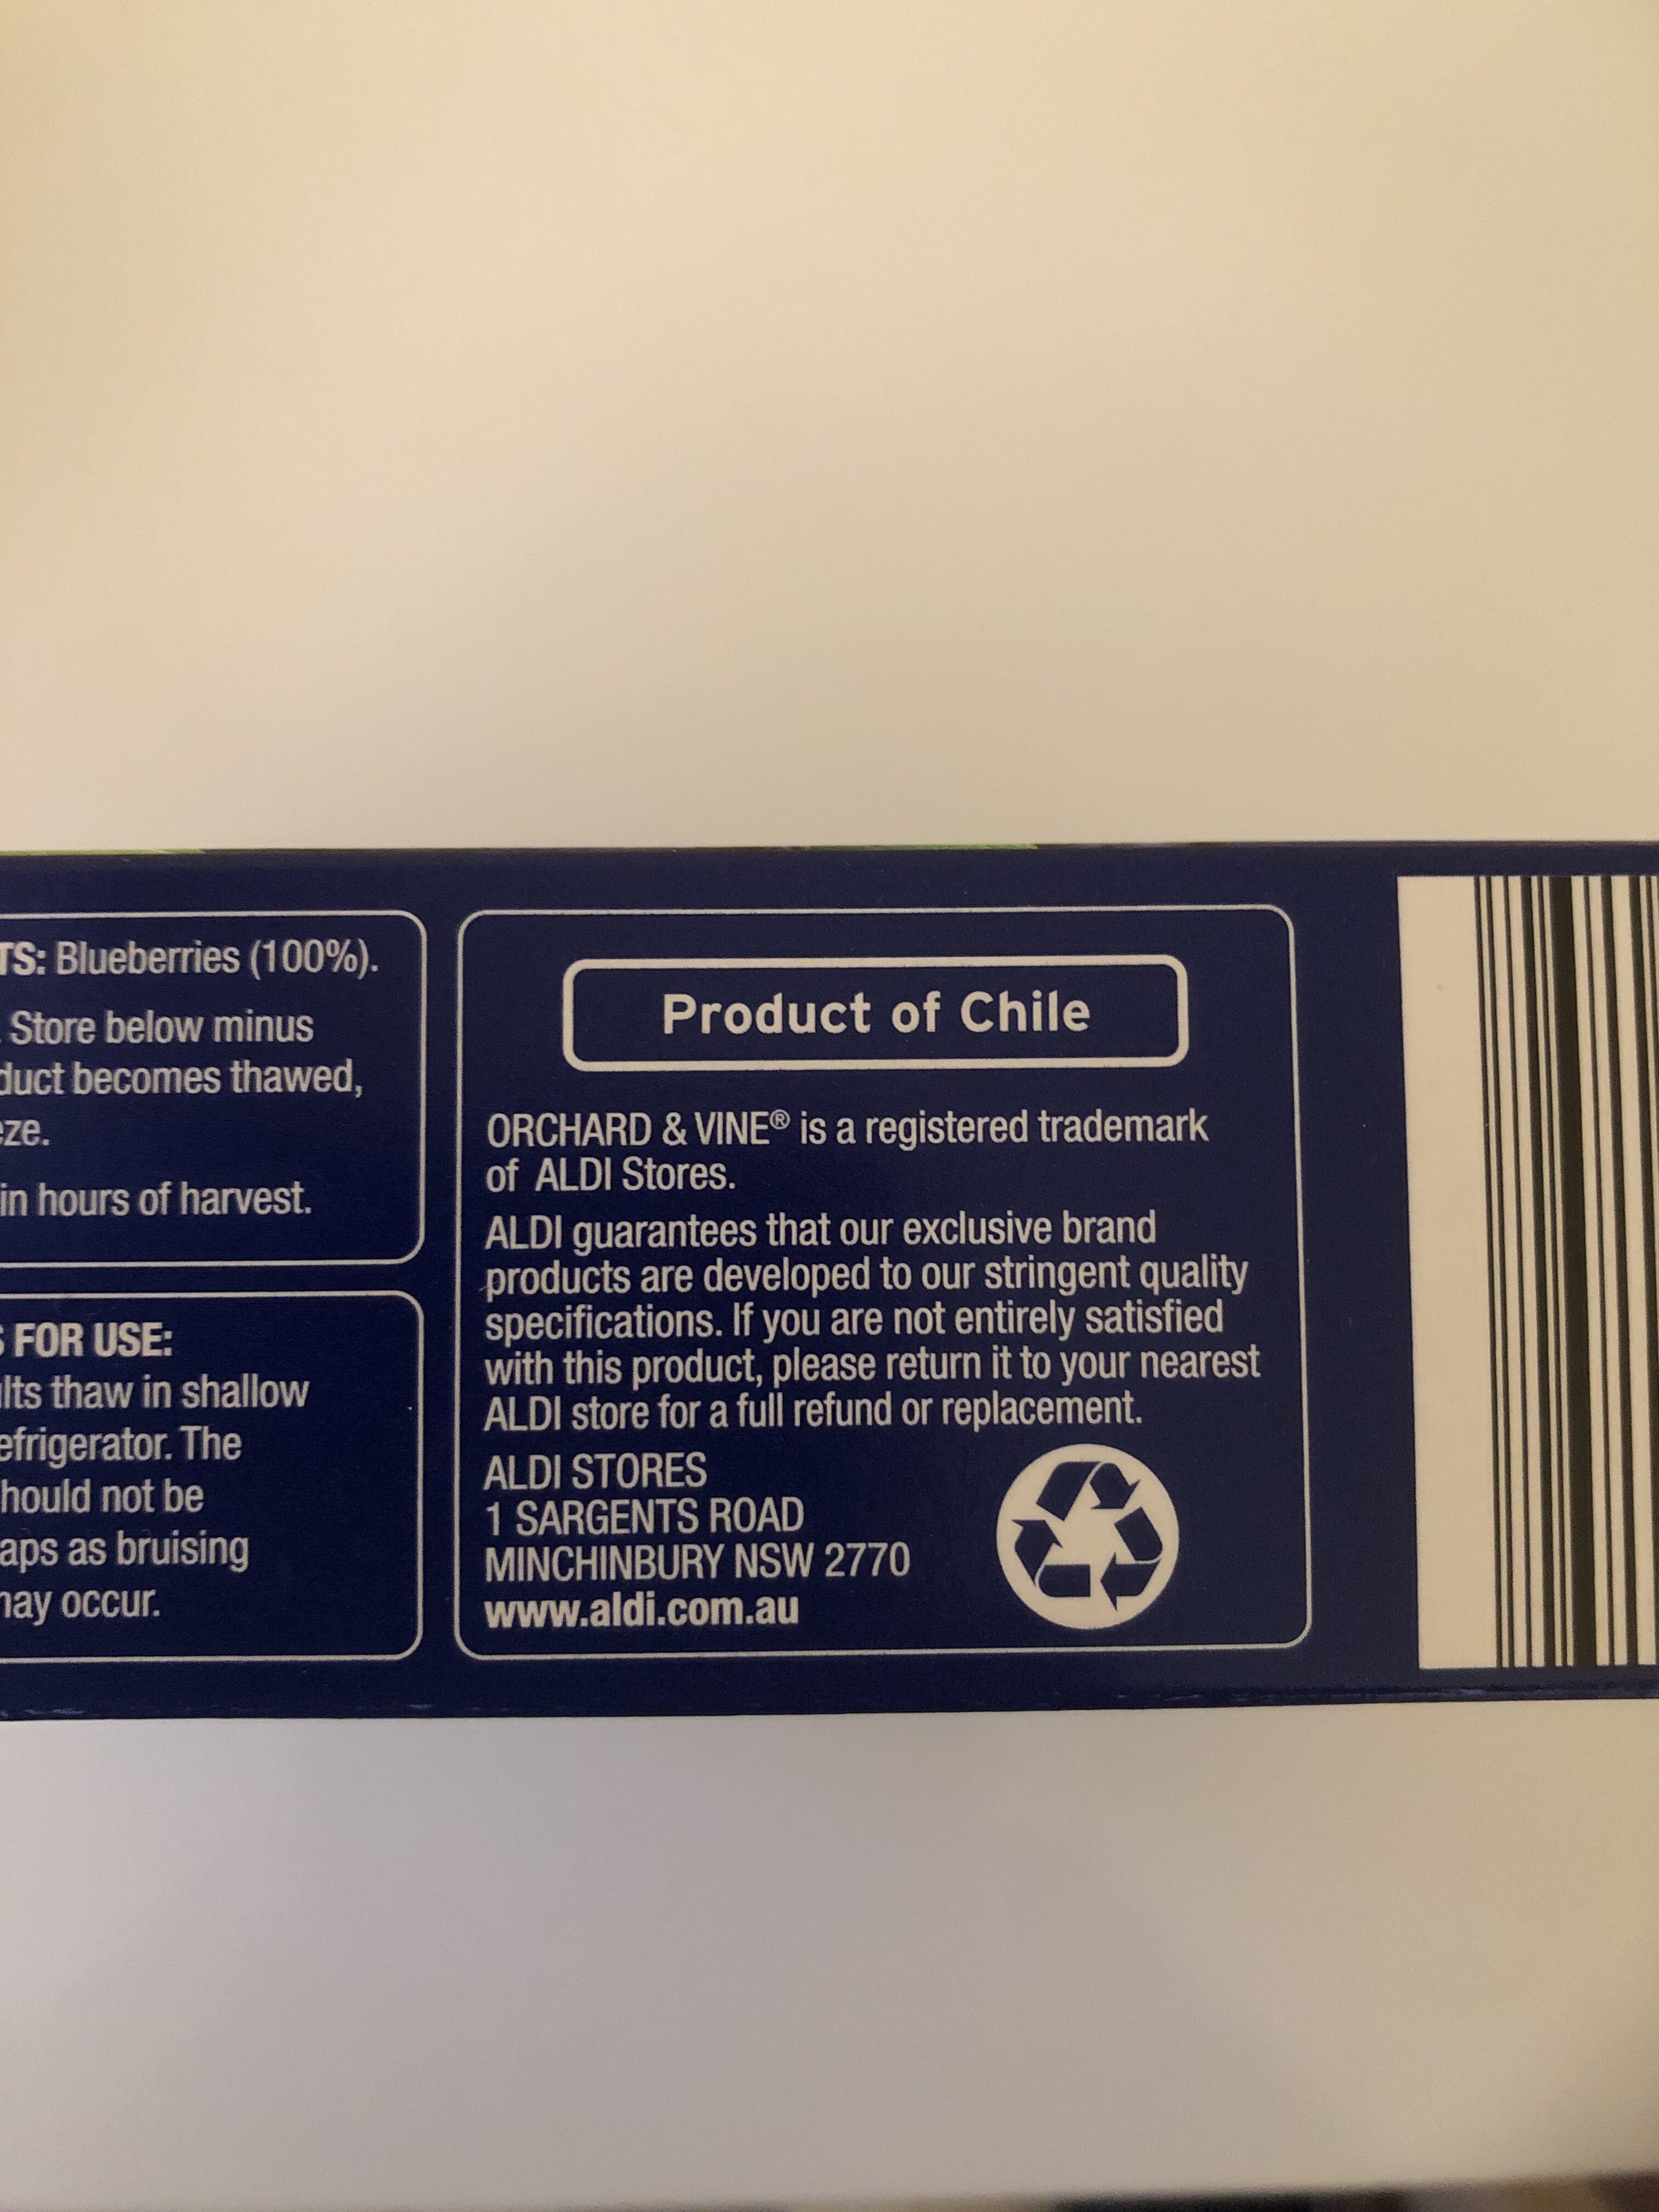 Aldi Orchard & Vine Blueberries - Recycling instructions and/or packaging information